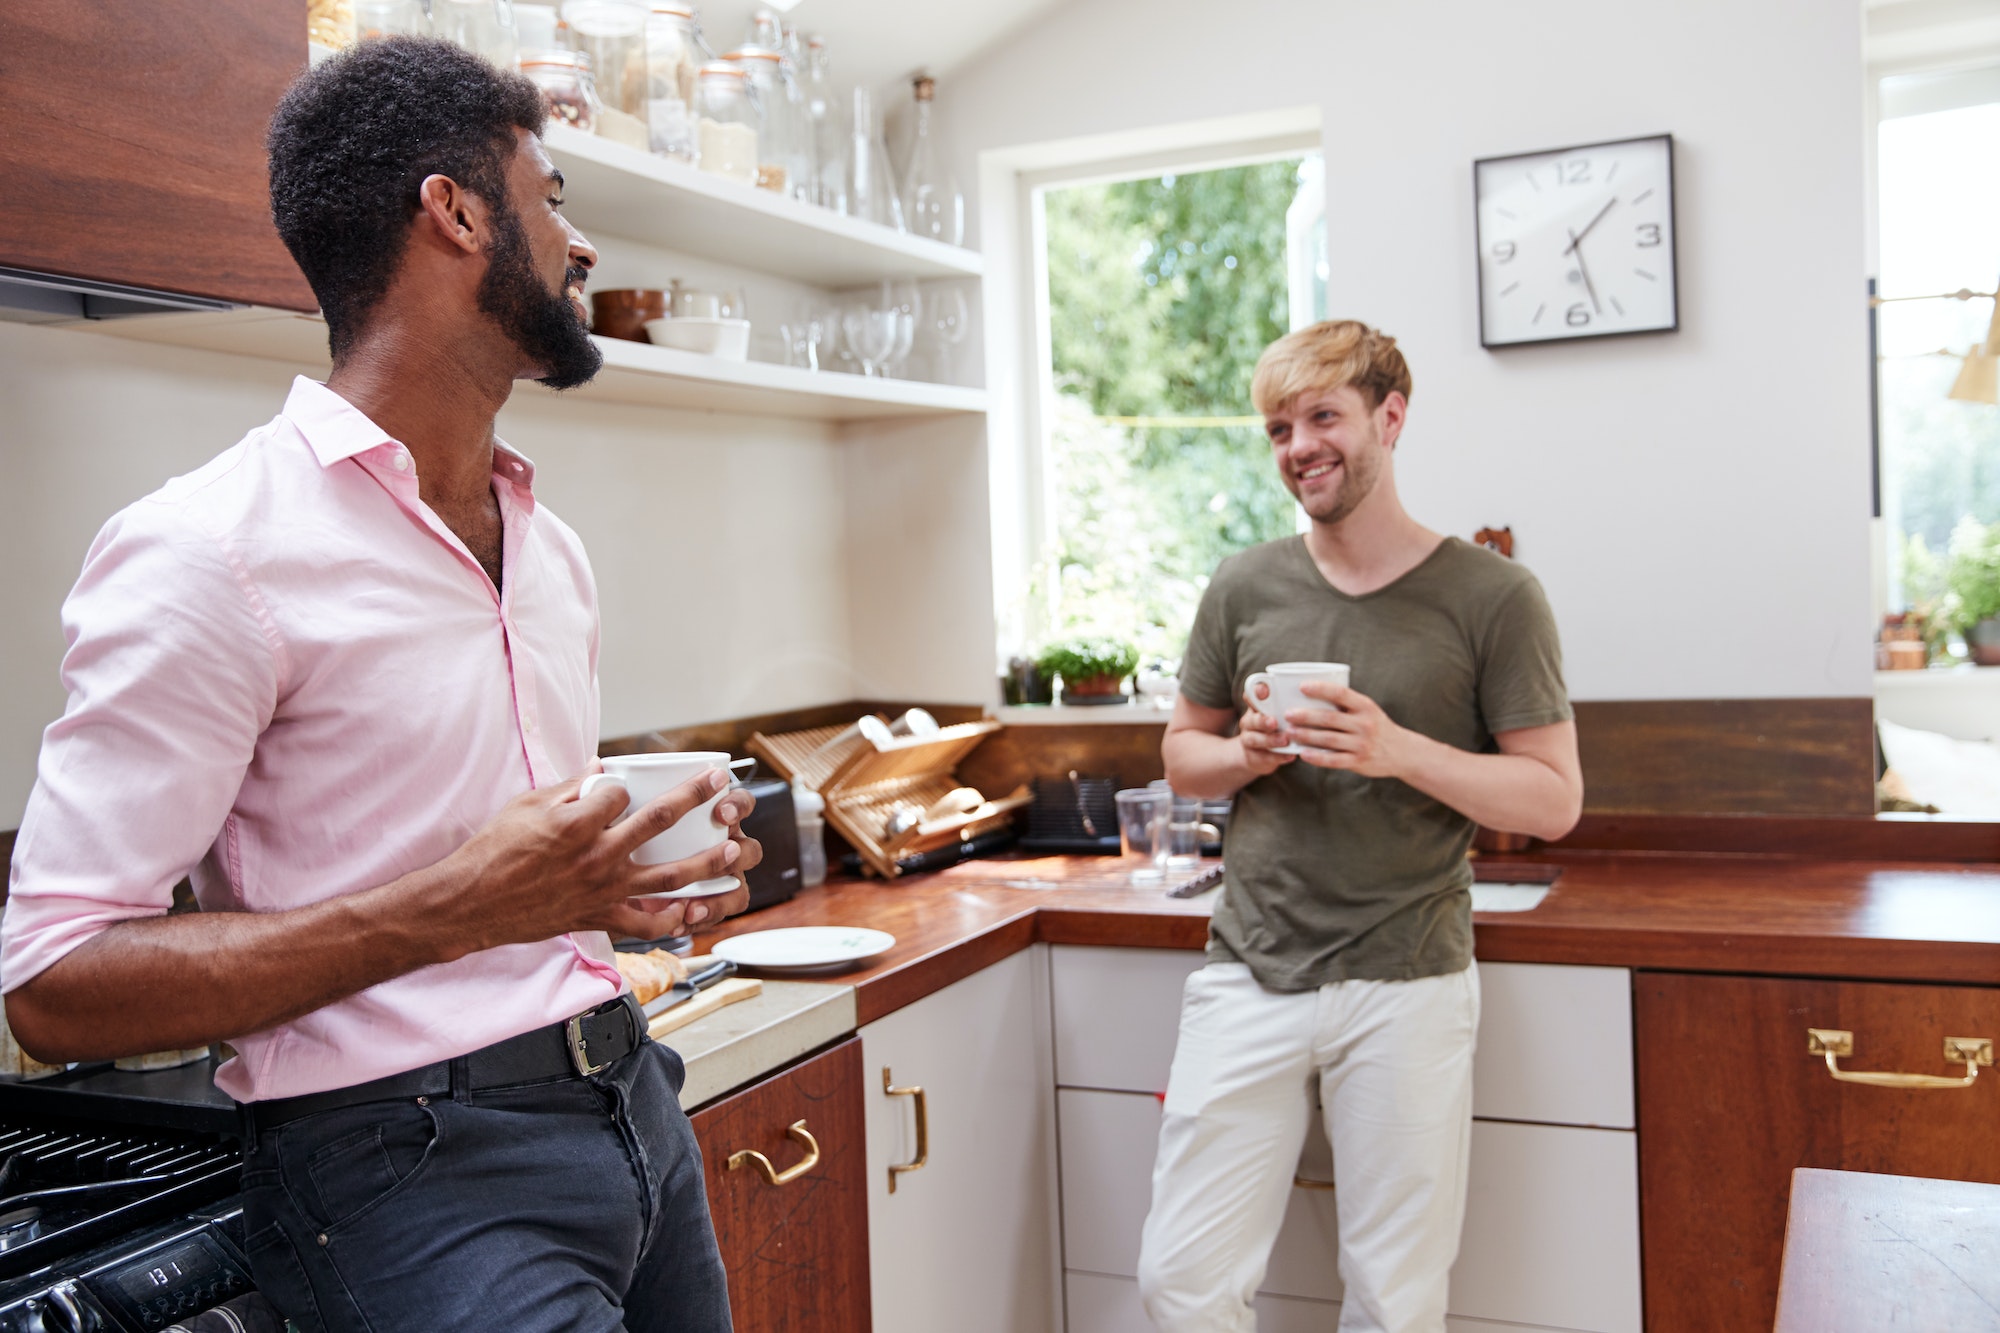 Male Same Sex Couple At Home Talking And Drinking Coffee In Kitchen Together